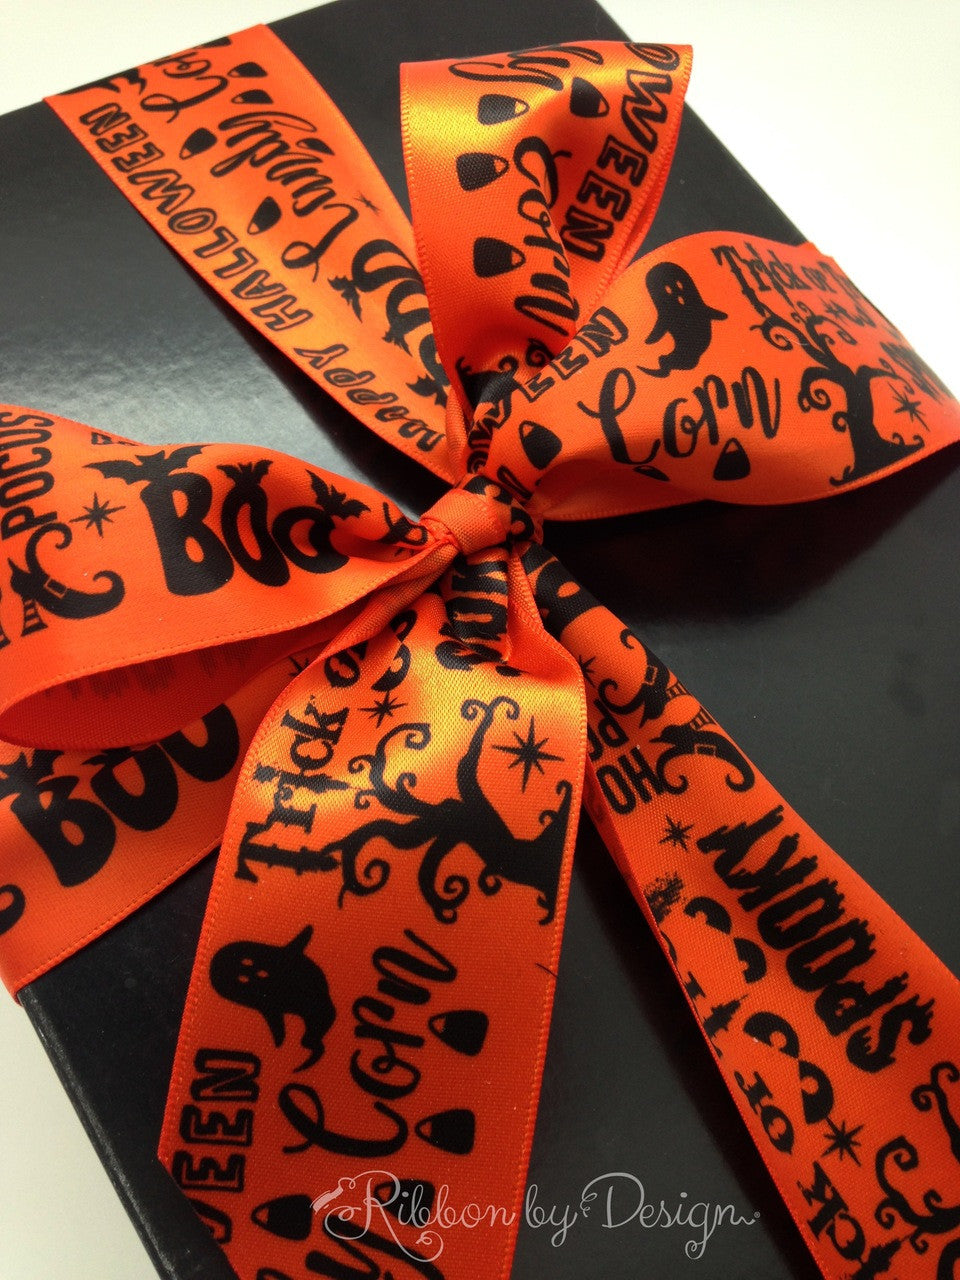 A special Halloween treat deserves our beautiful Halloween word block ribbon! What a pretty presentation, just treats, no tricks here!